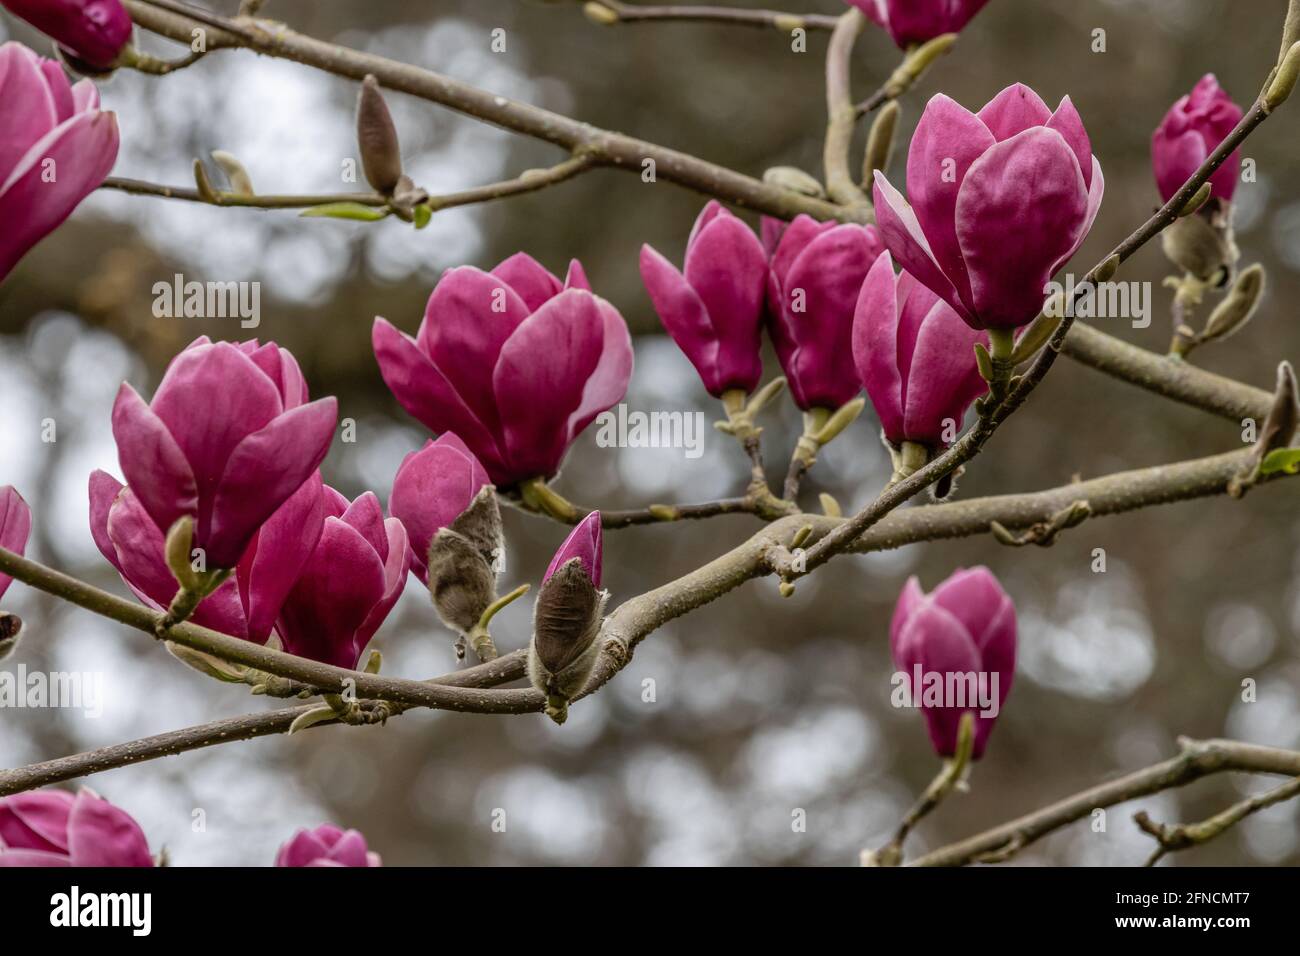 Cluster of large pale purple Magnolia Theodora flowers in spring Stock Photo